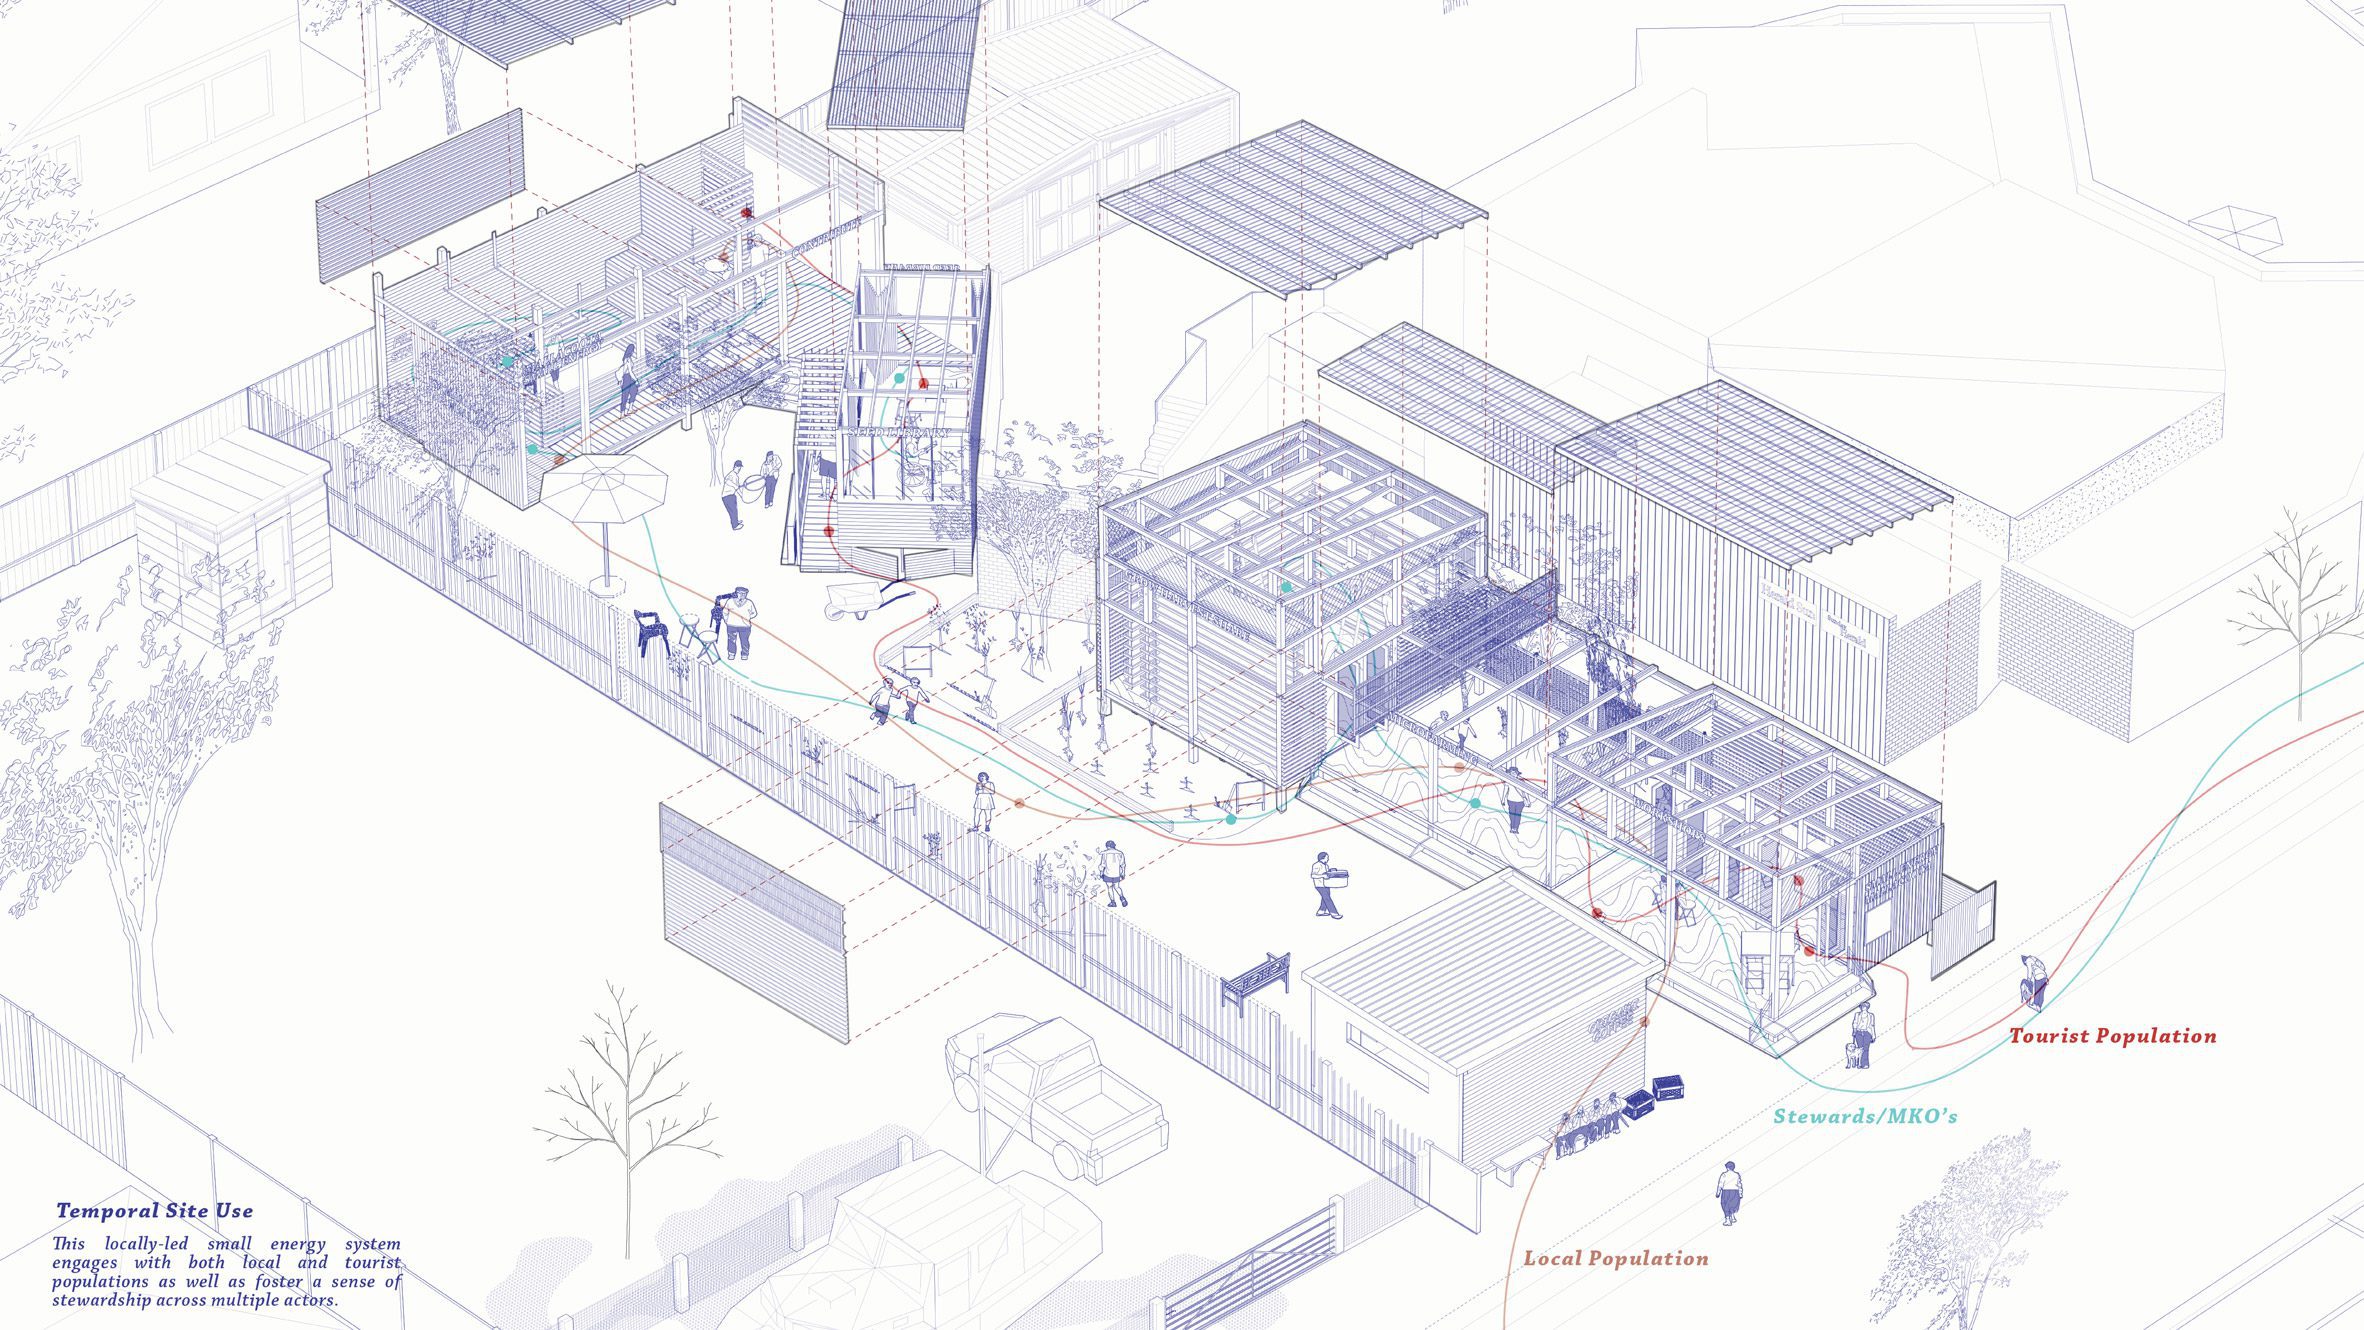 Blue axonometric drawing by a masters architecture student at Monash University